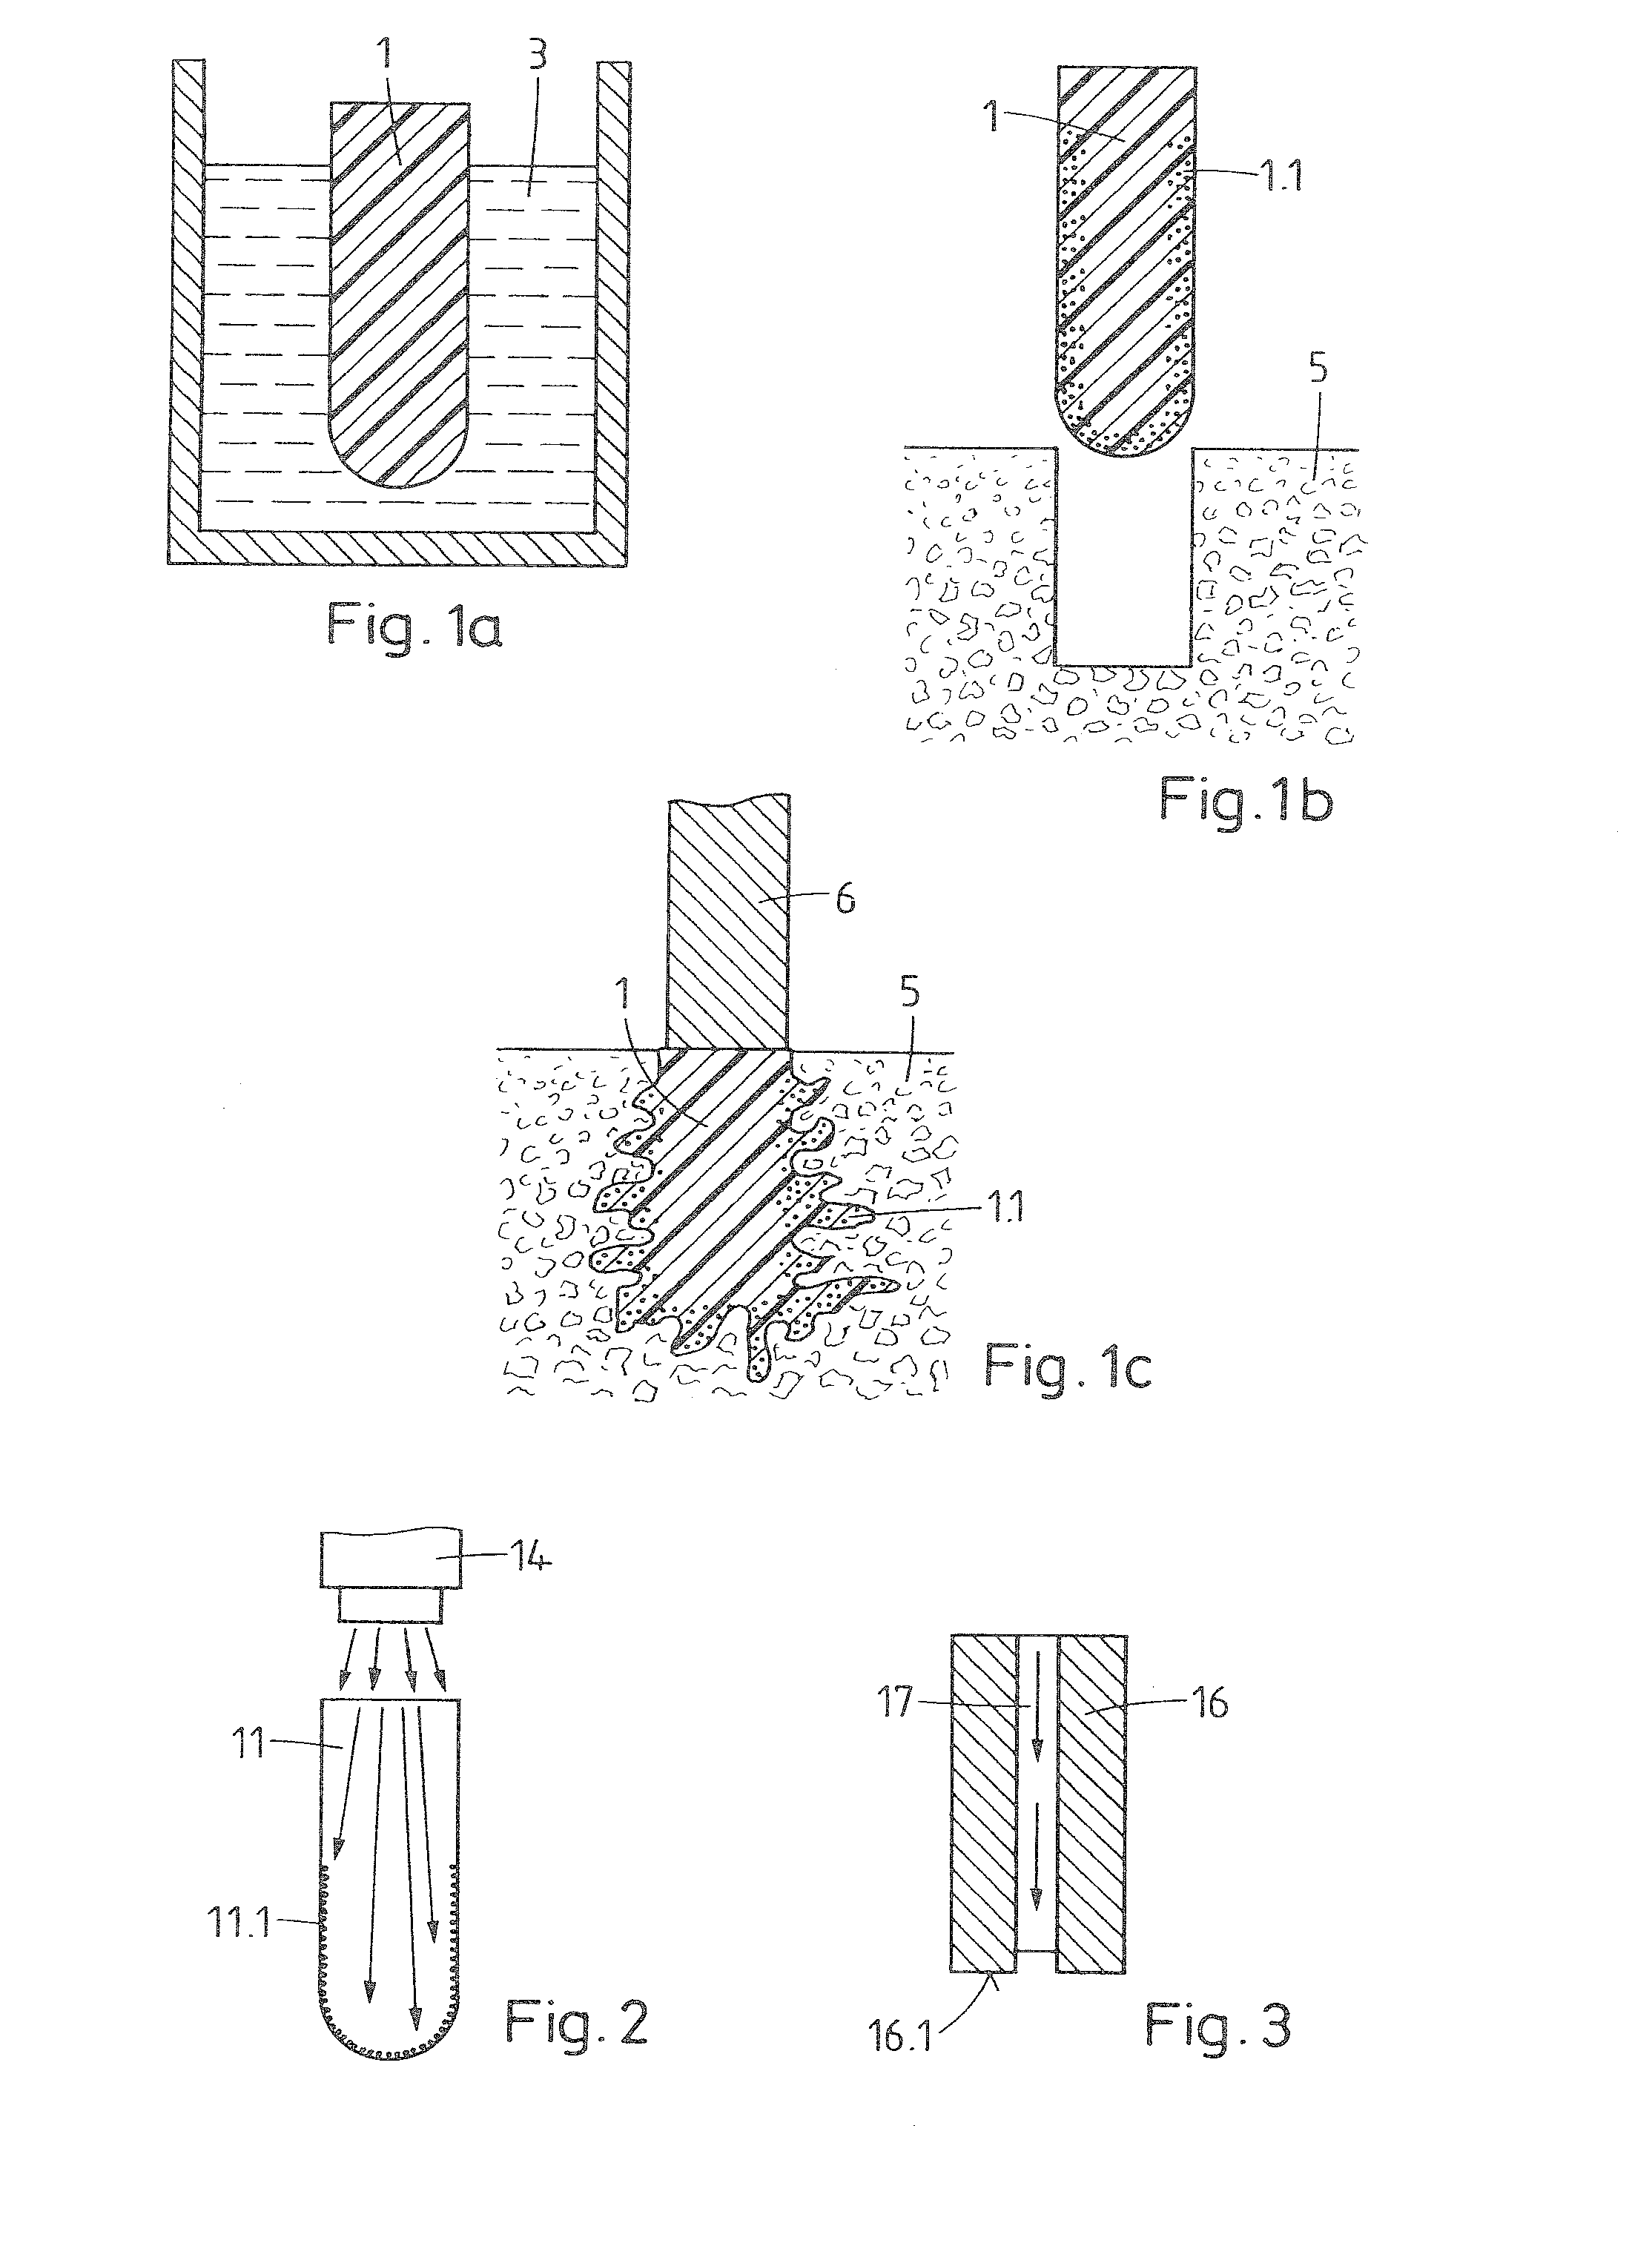 Implant, method of preparing an implant, implantation method, and kit of parts